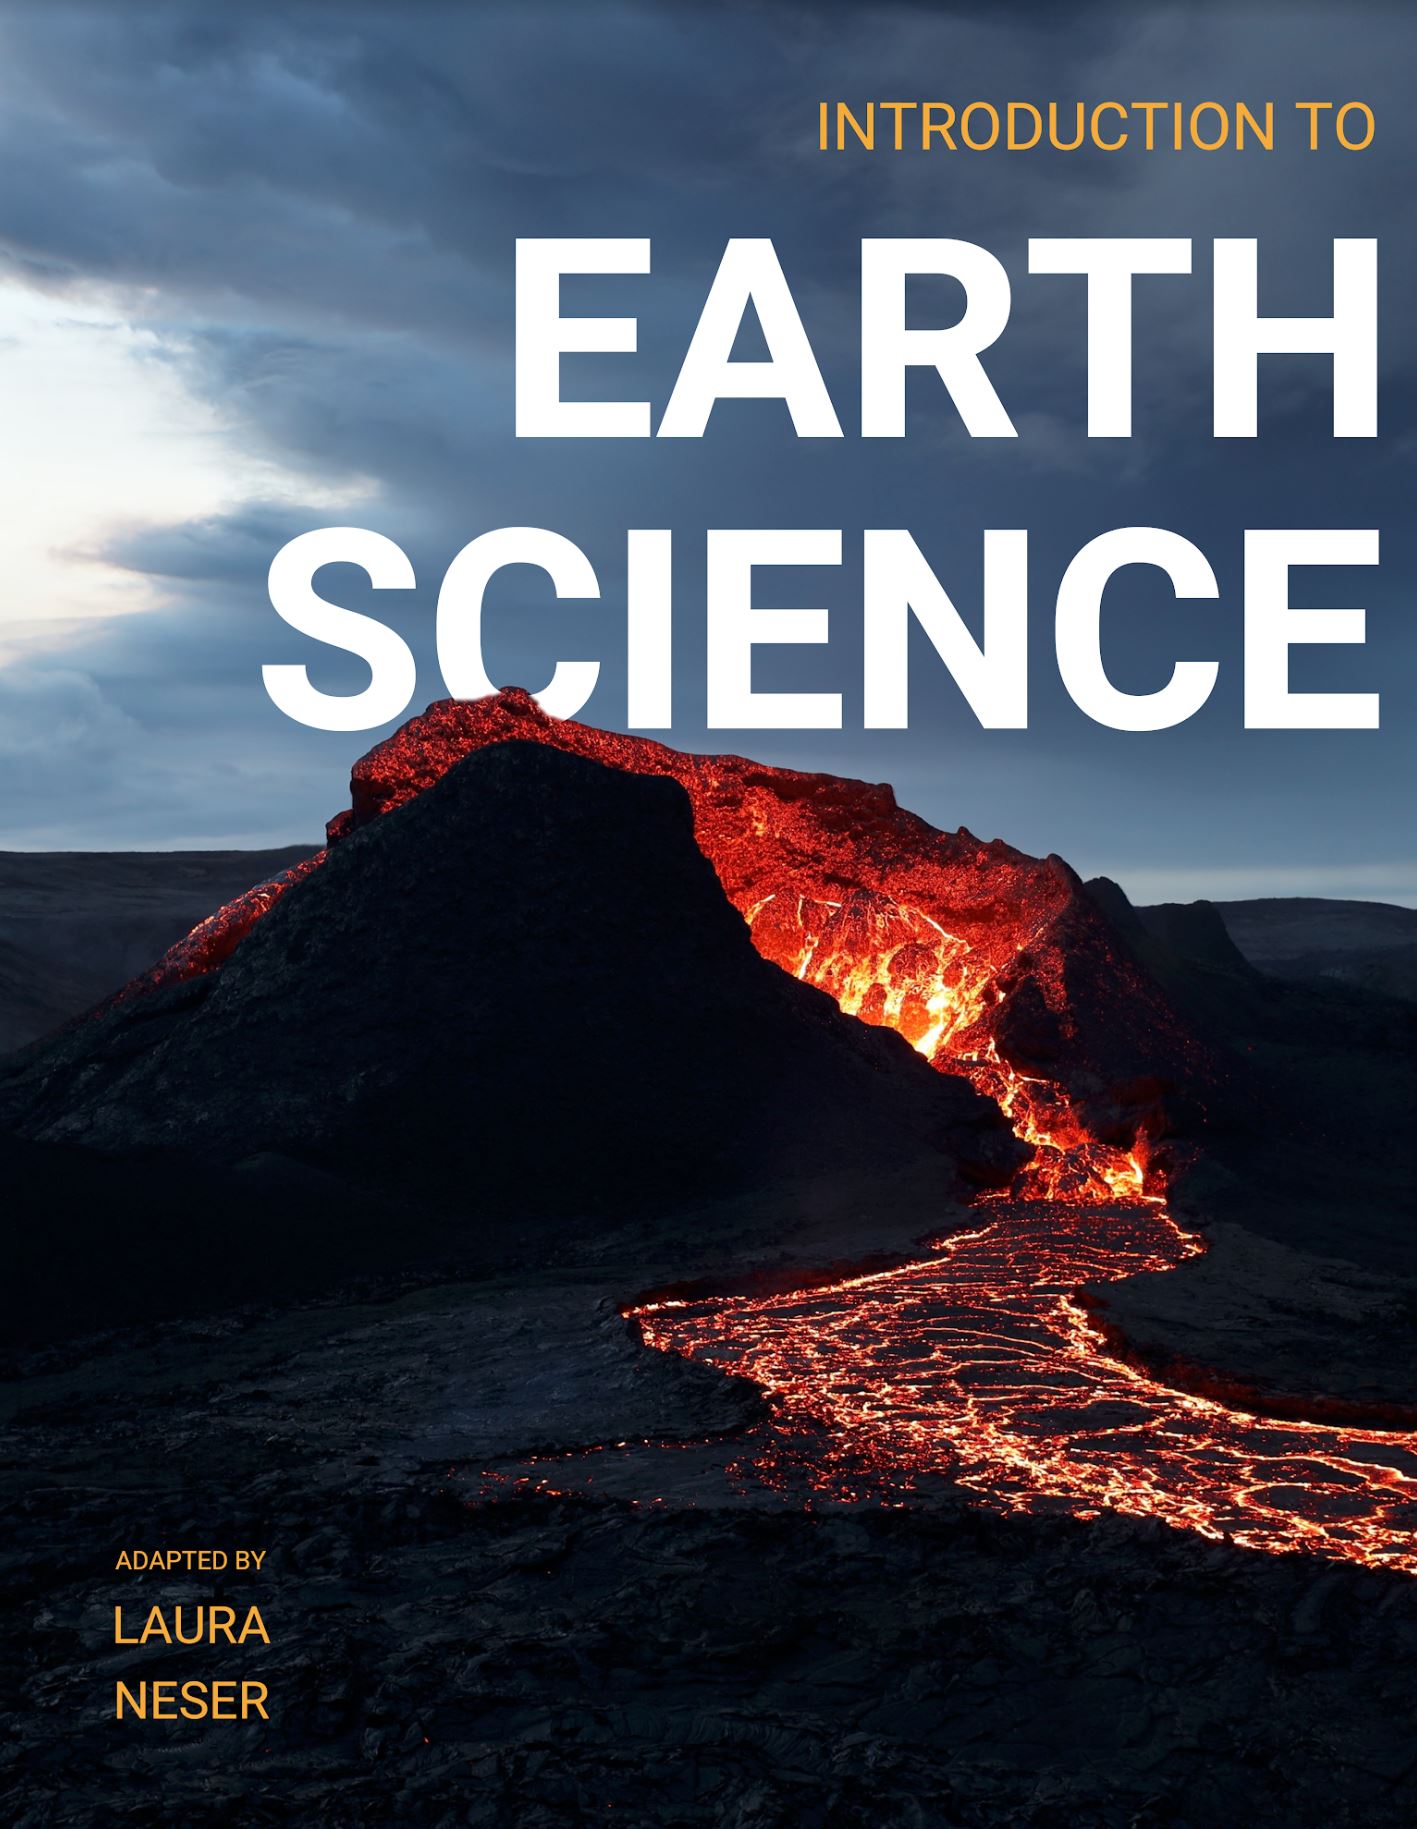 Science　Earth　Open　Introduction　Library　to　Textbook